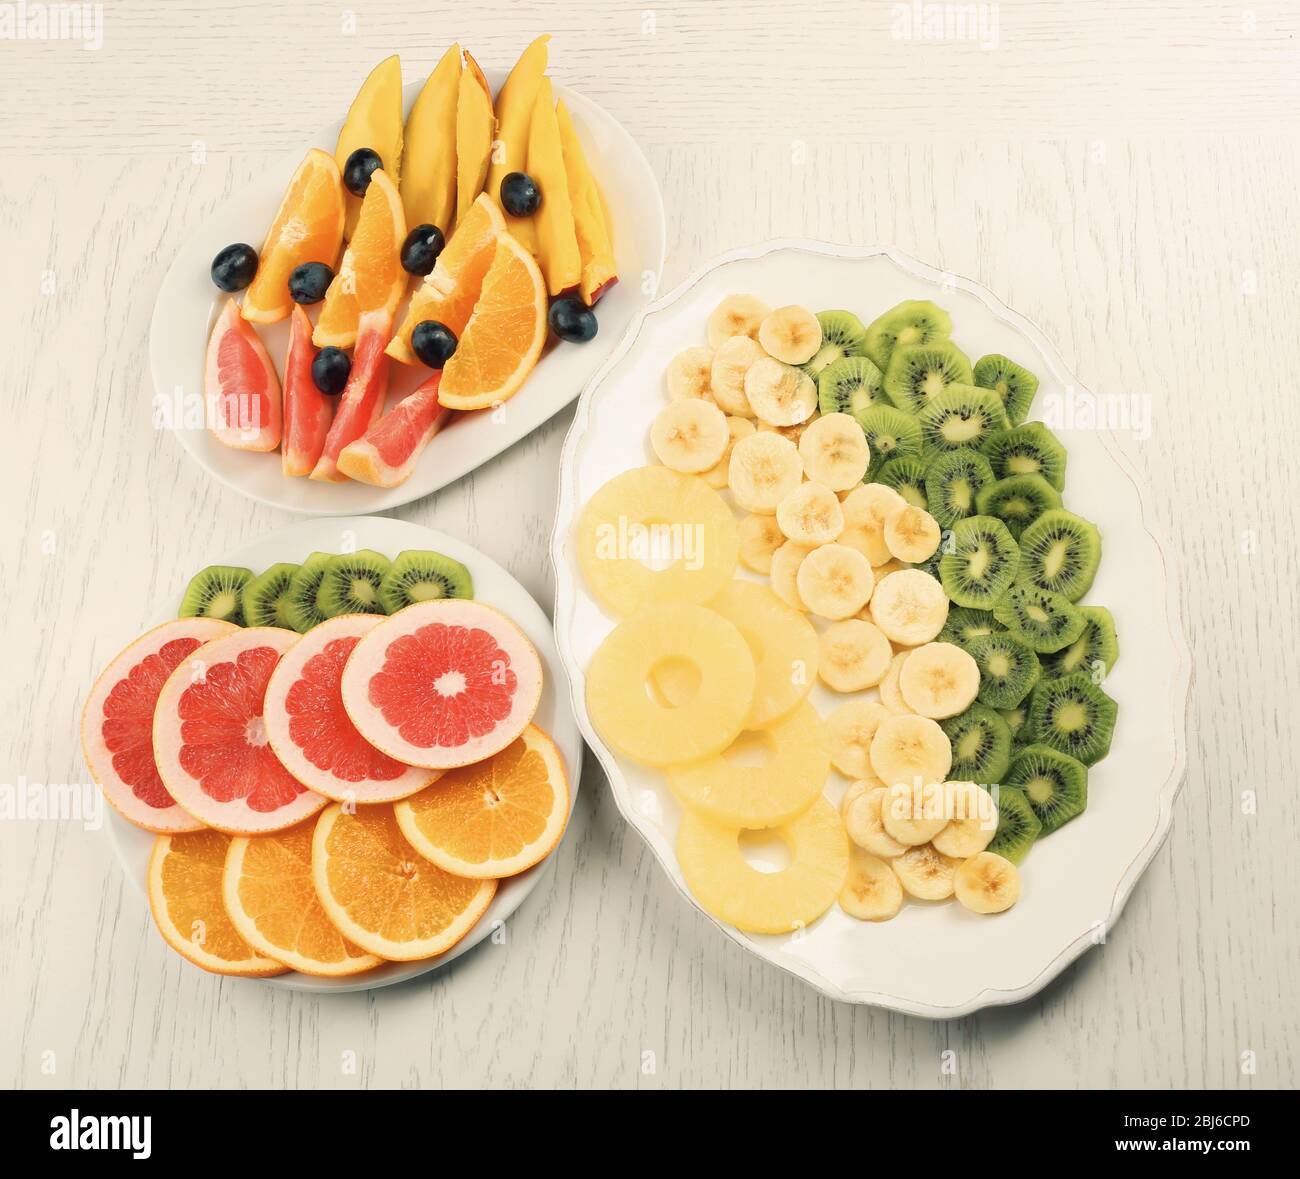 Fruits and vegetables on light wooden background. healthy eating concept. Stock Photo